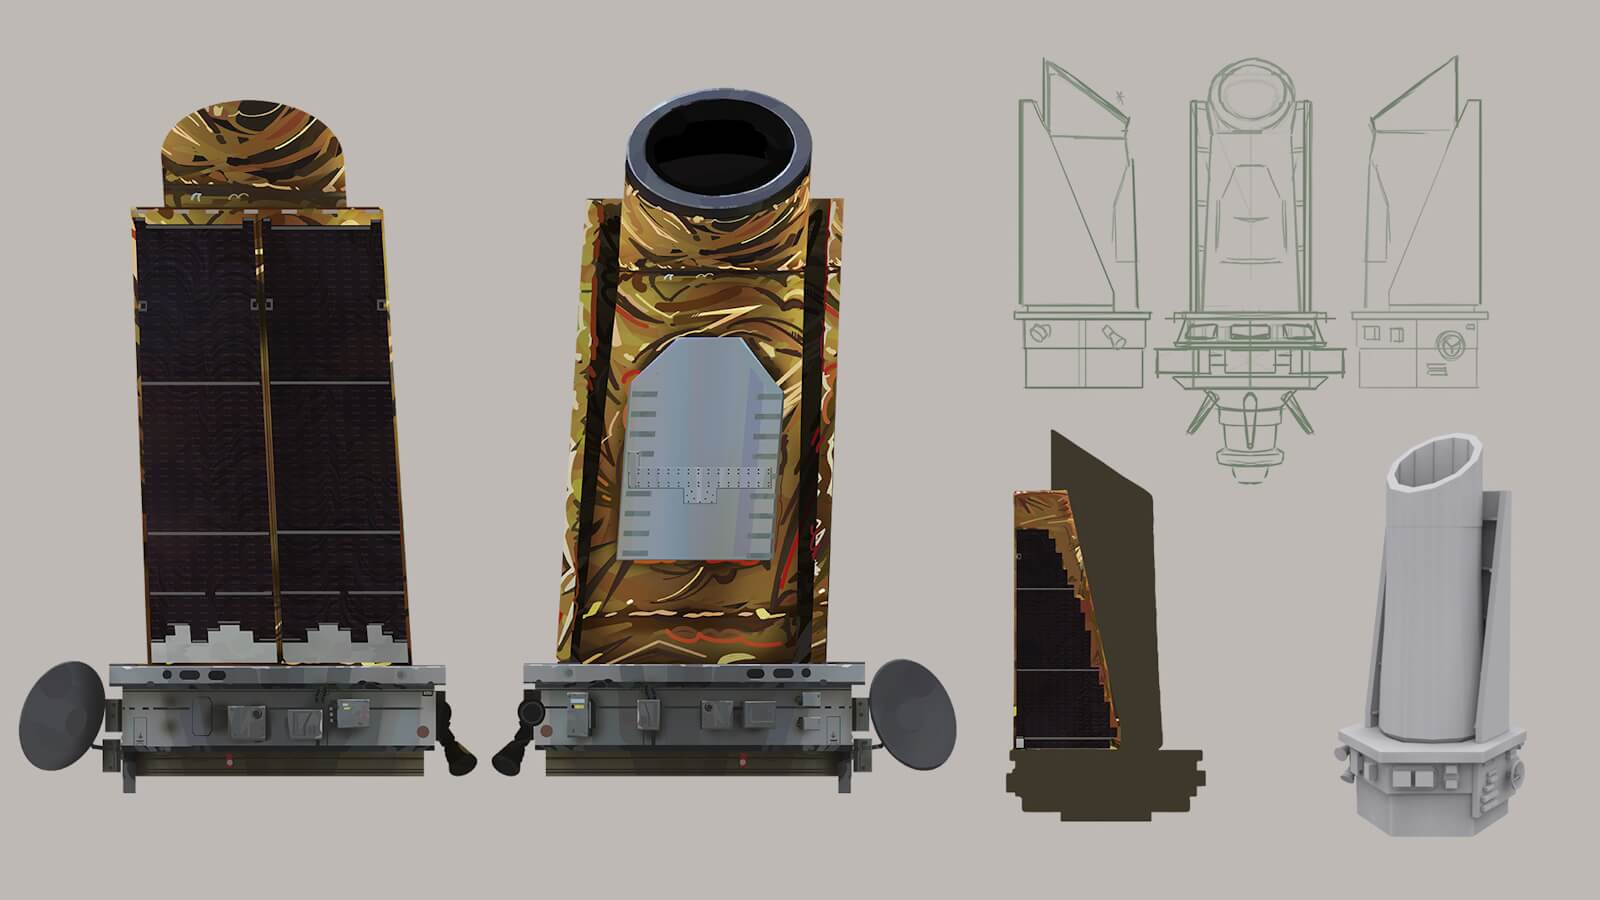 Concept art for Kepler, the rocket, in the early stages of development.